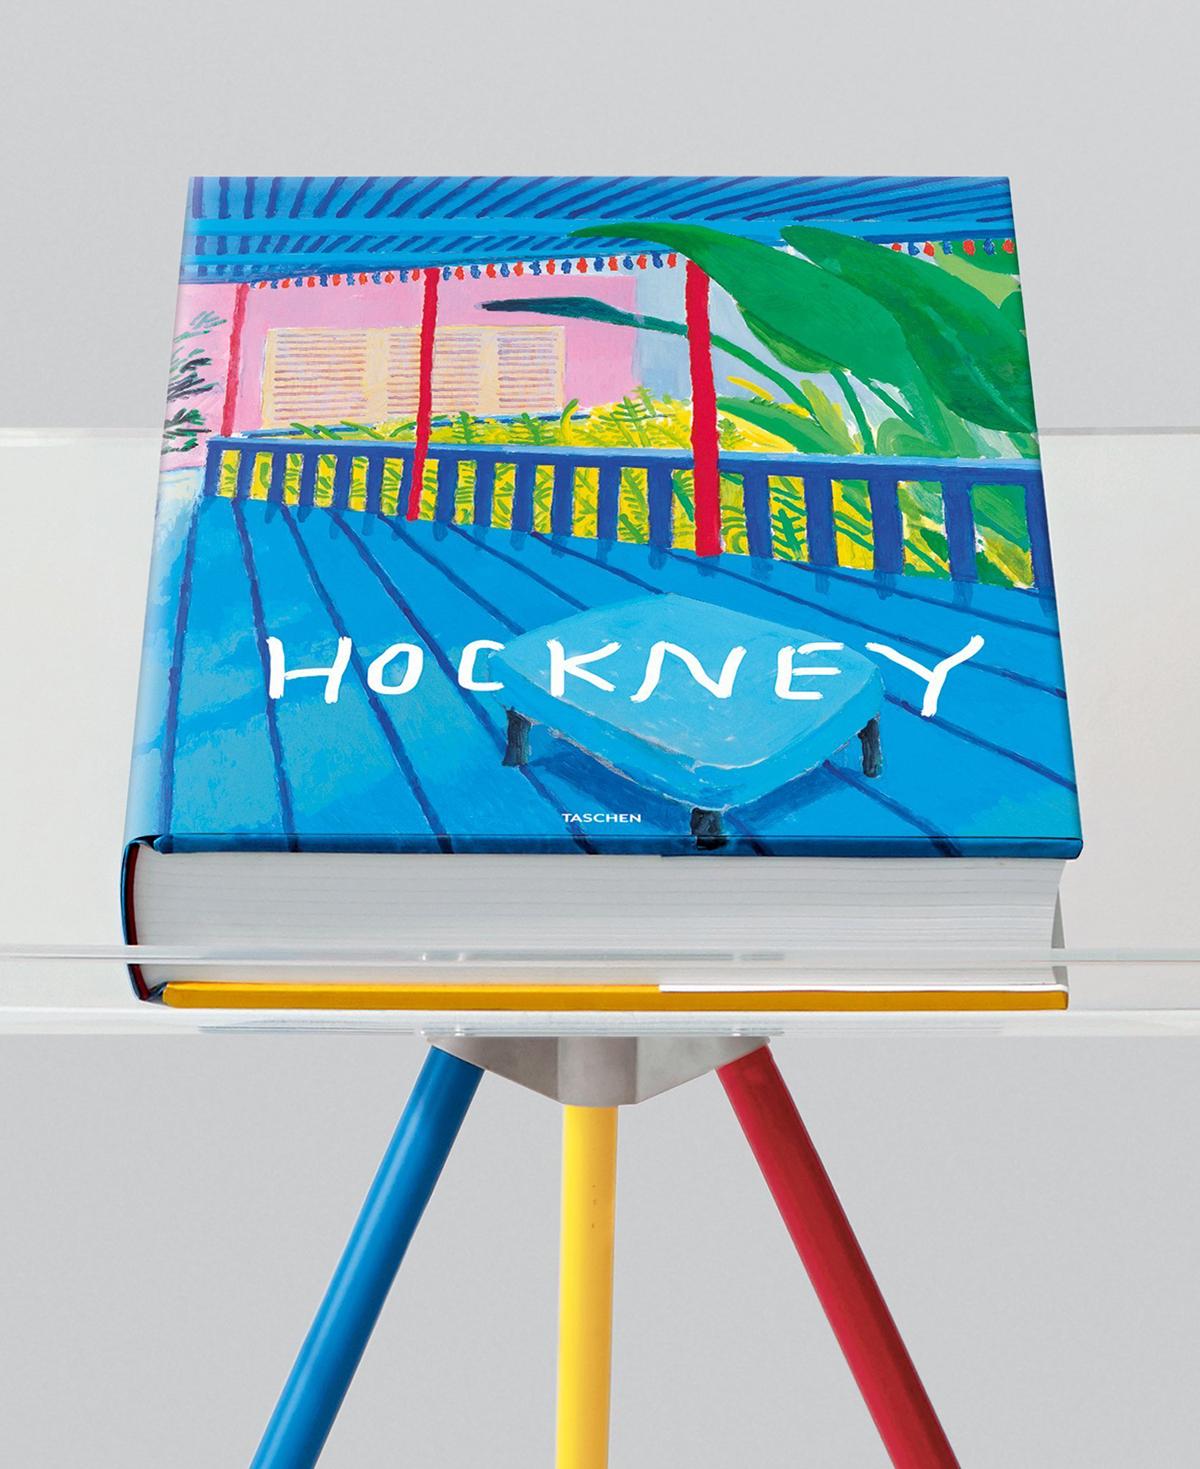 The book’s sumptuous portfolio is supplemented by an illustrated chronology of more than 600 pages, contextualizing Hockney’s art with drawings, graphic work, portrait photos, and text based on the artist’s own writings as well as contemporary